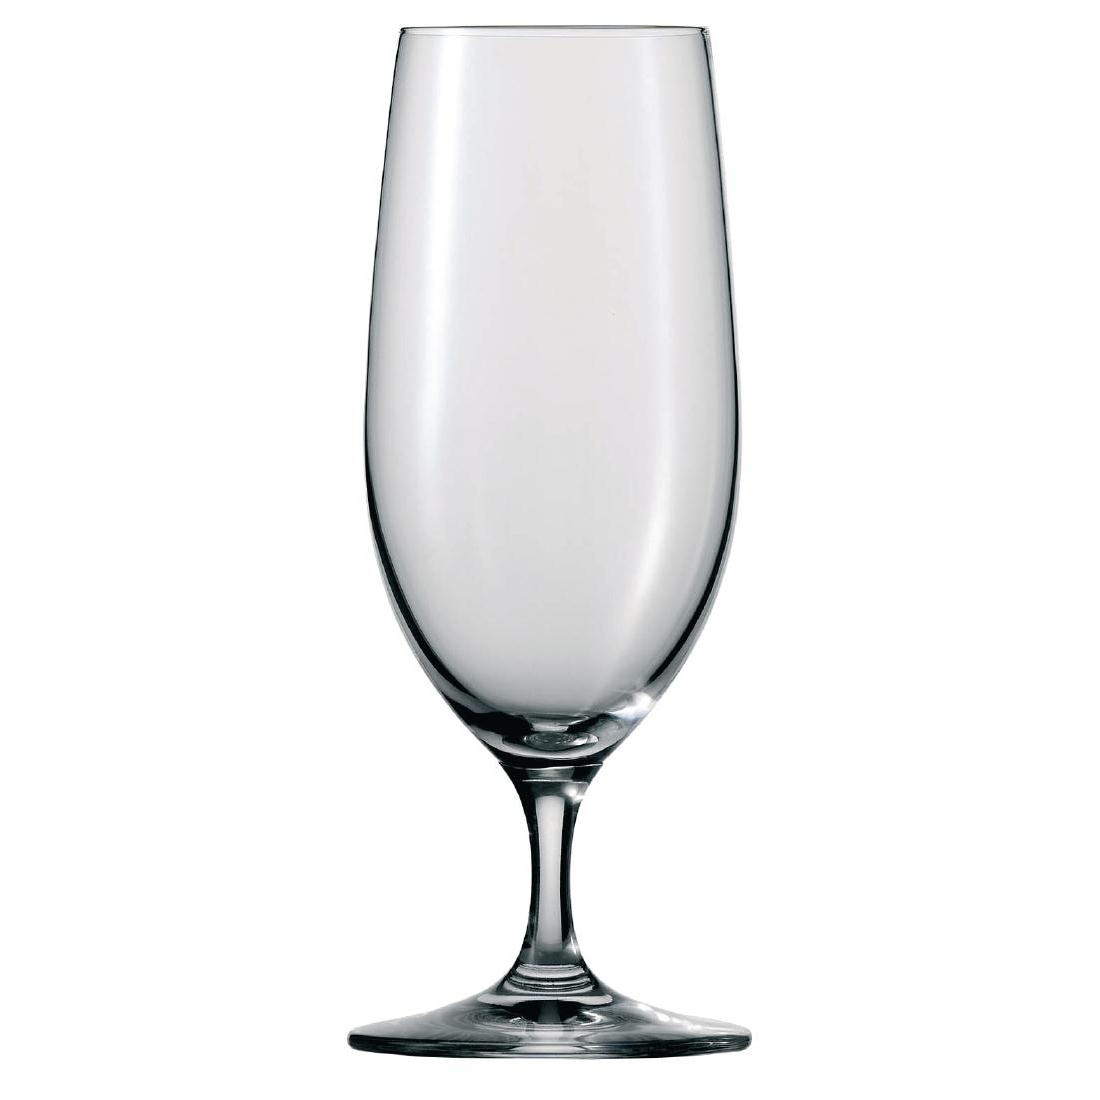 Arcoroc Nonic Nucleated Beer Glasses 570ml CE Marked by Arcoroc-D940